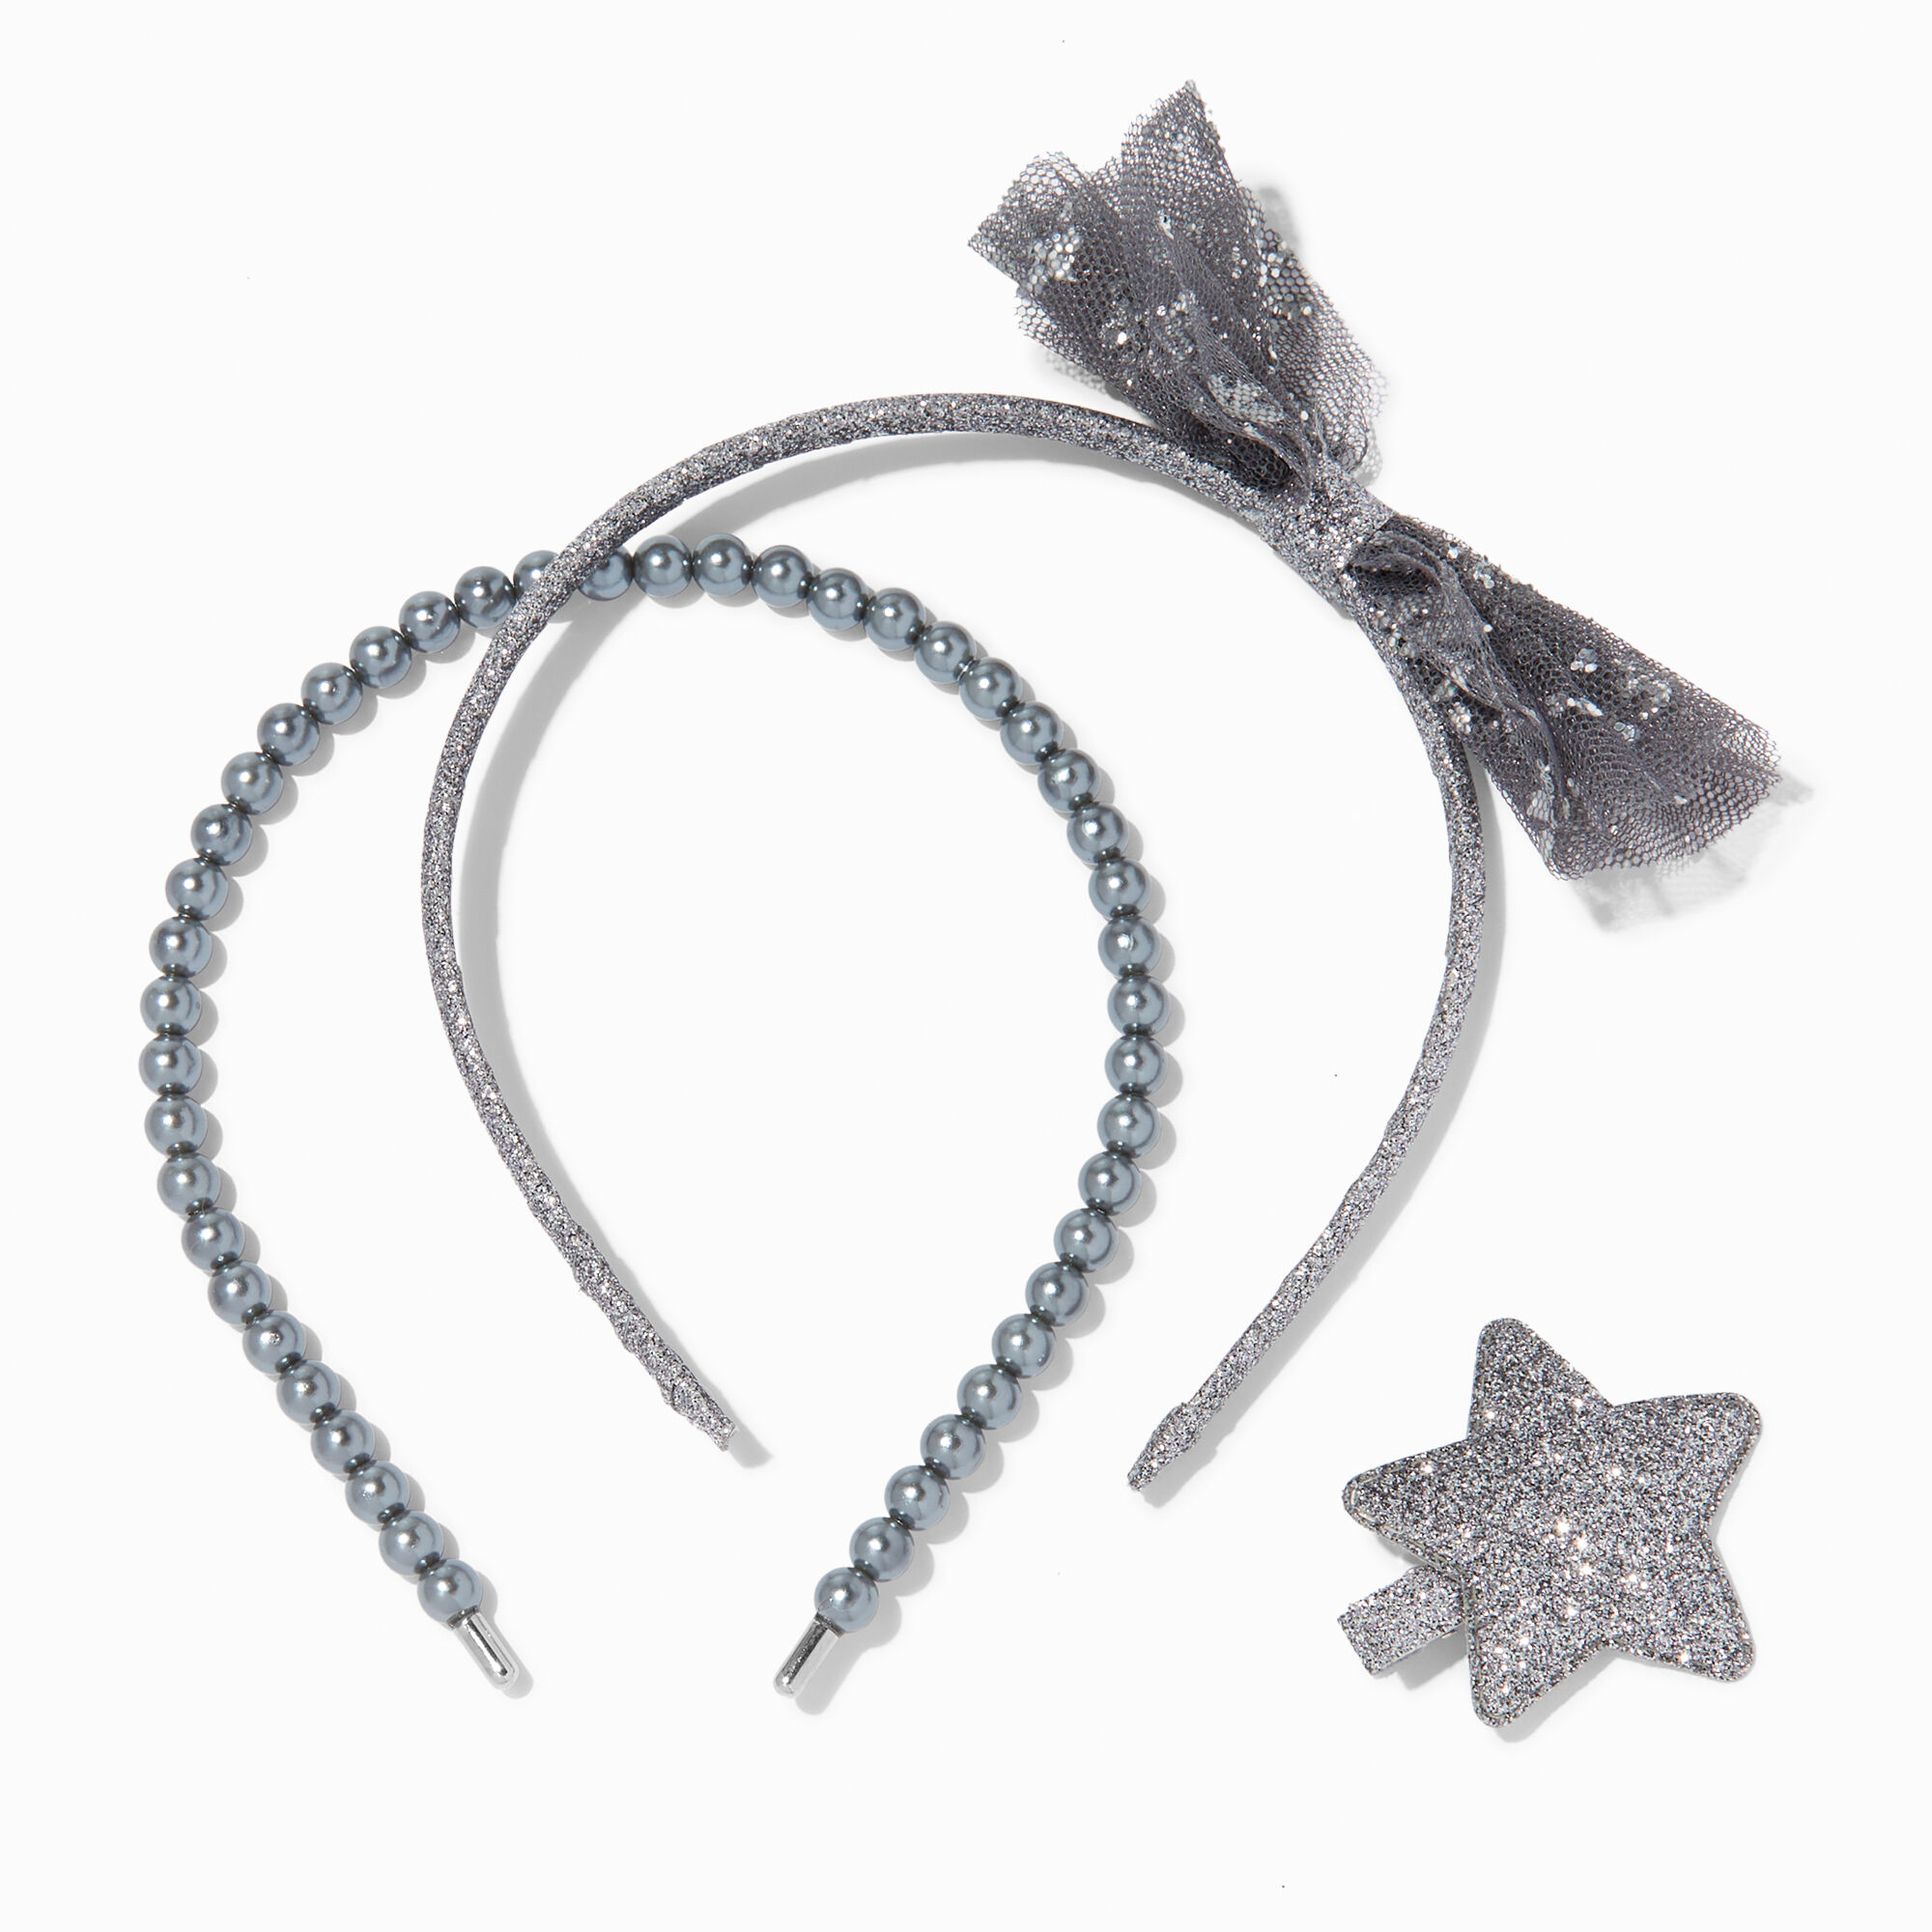 View Claires Club Fairy Headband Set 3 Pack Silver information